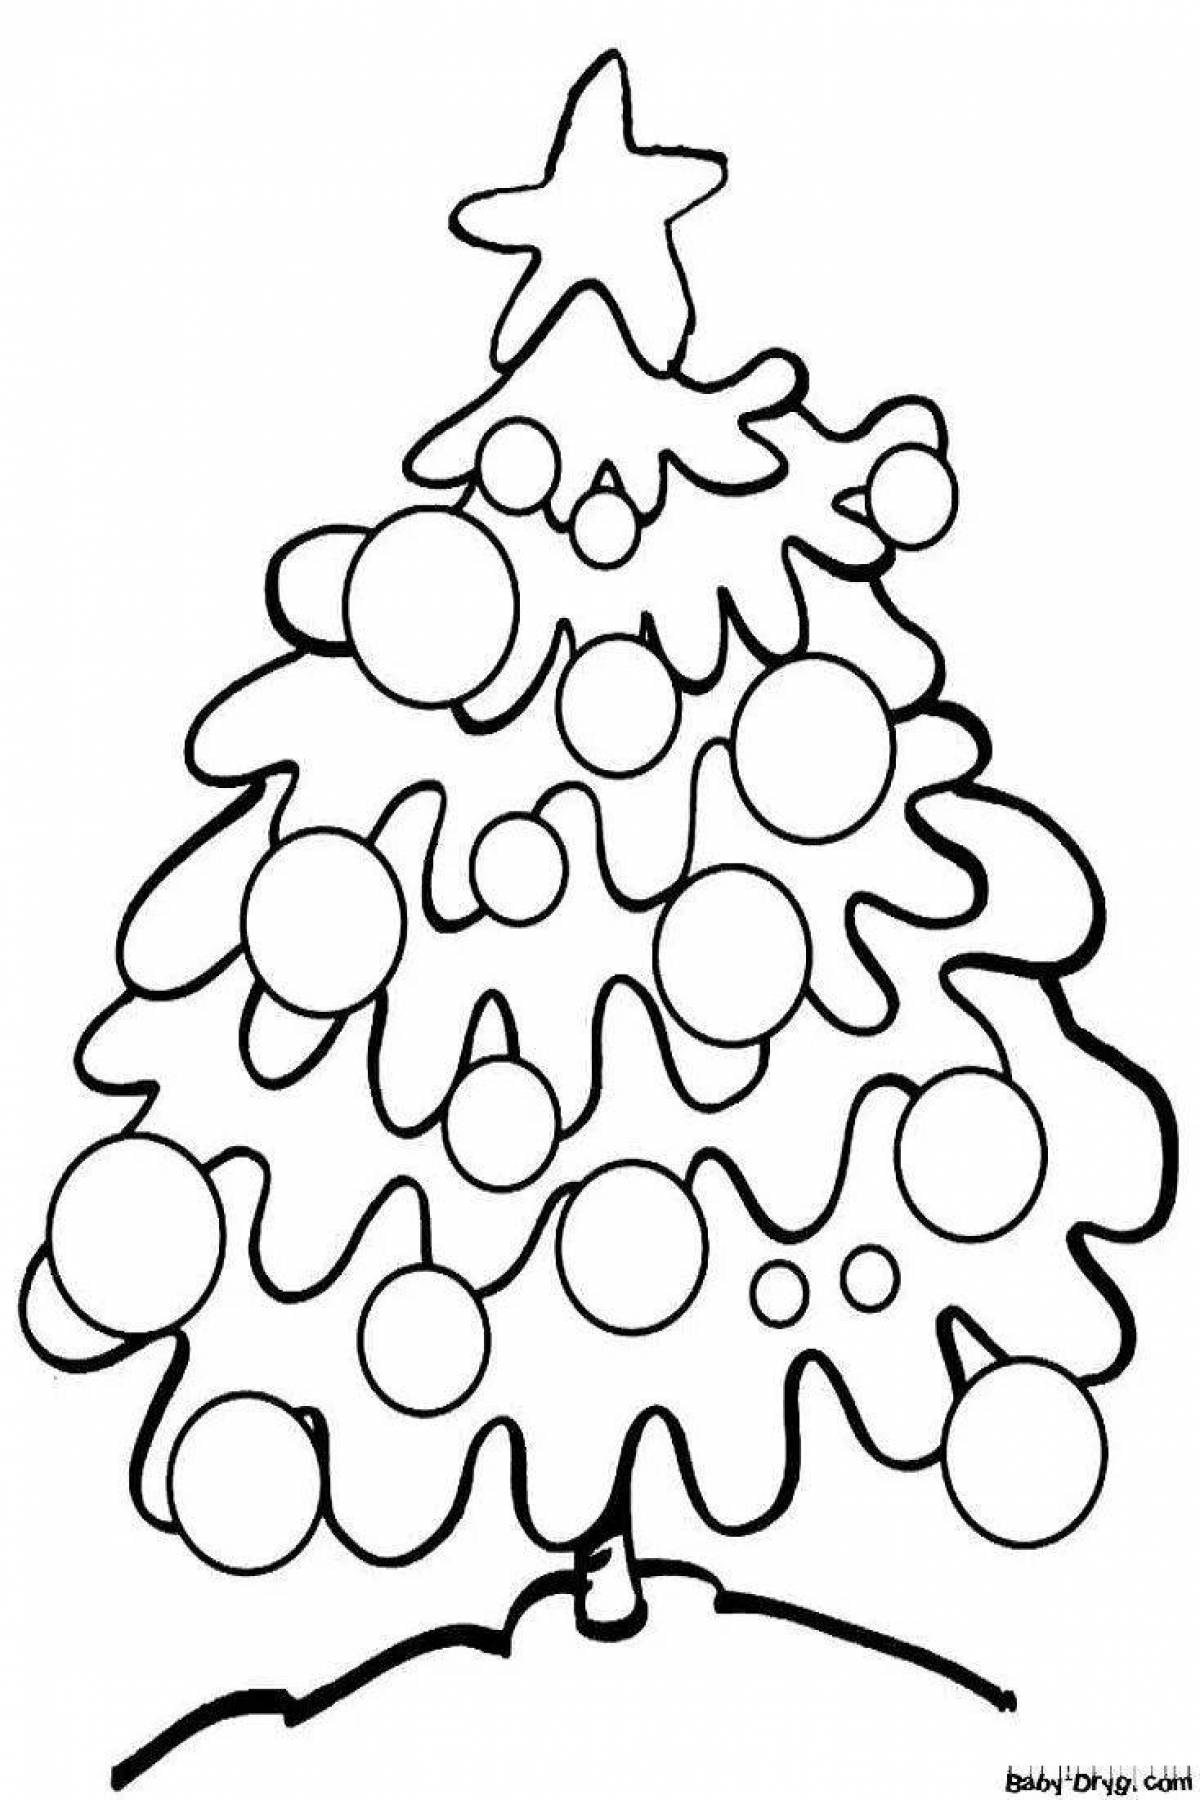 Gorgeous Christmas tree coloring book for 5-6 year olds